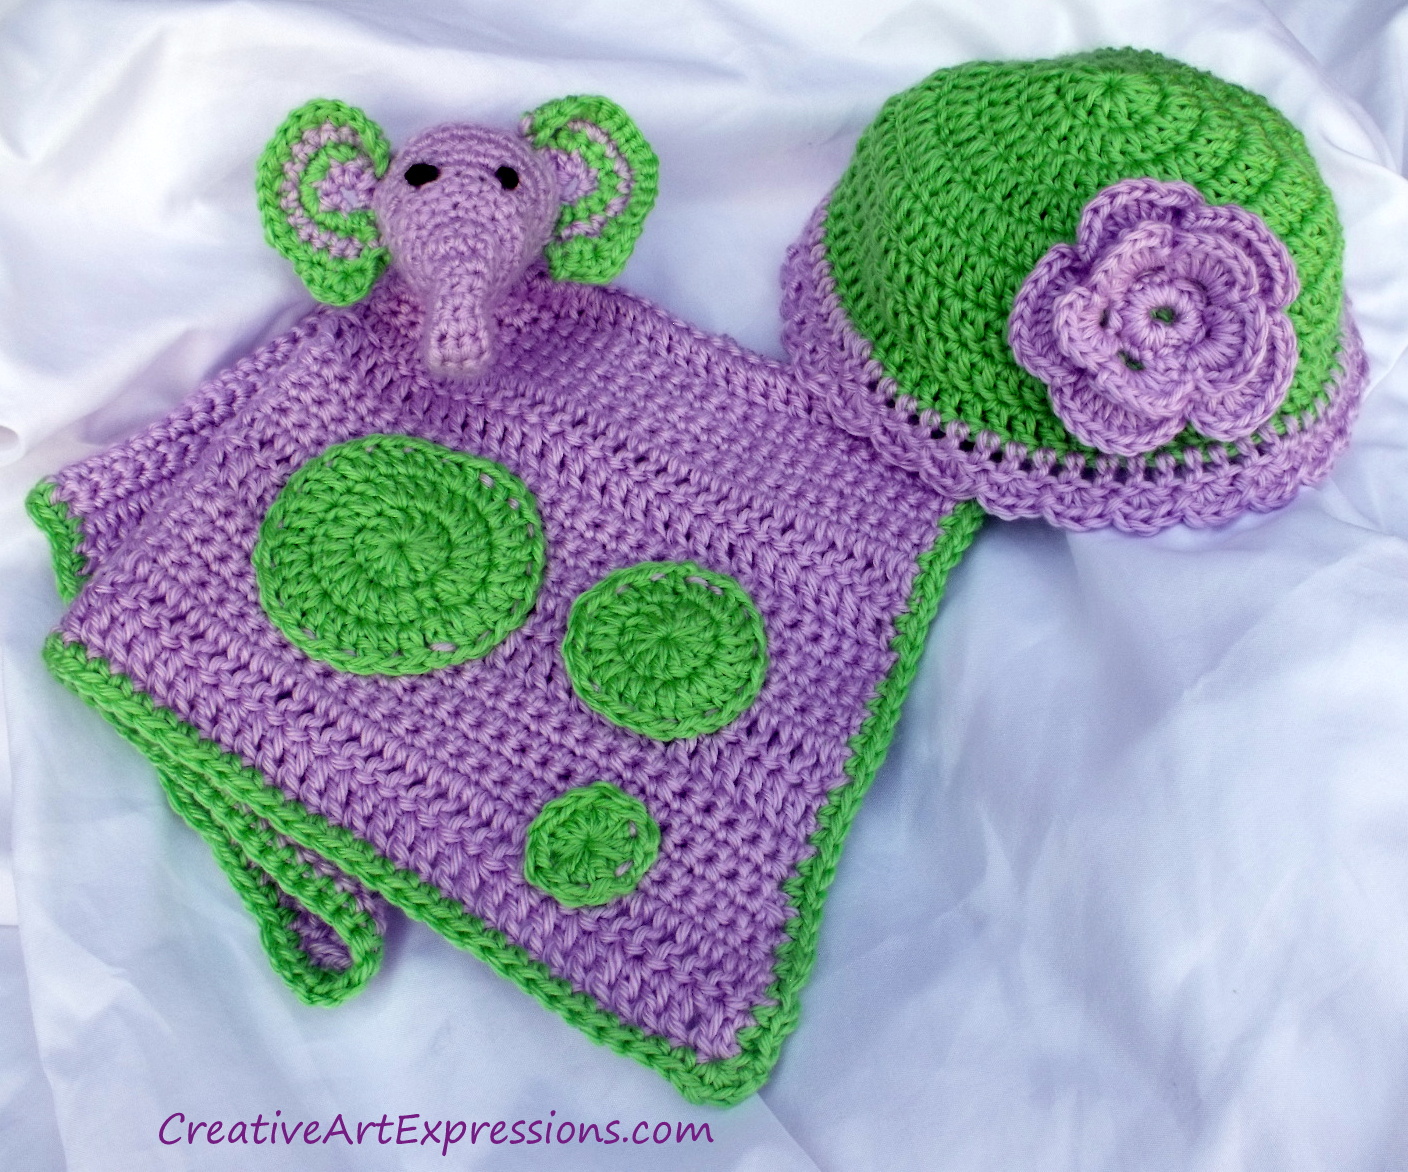 Creative Art Expressions Hand Crocheted Elephant Lovey & Baby Hat Set